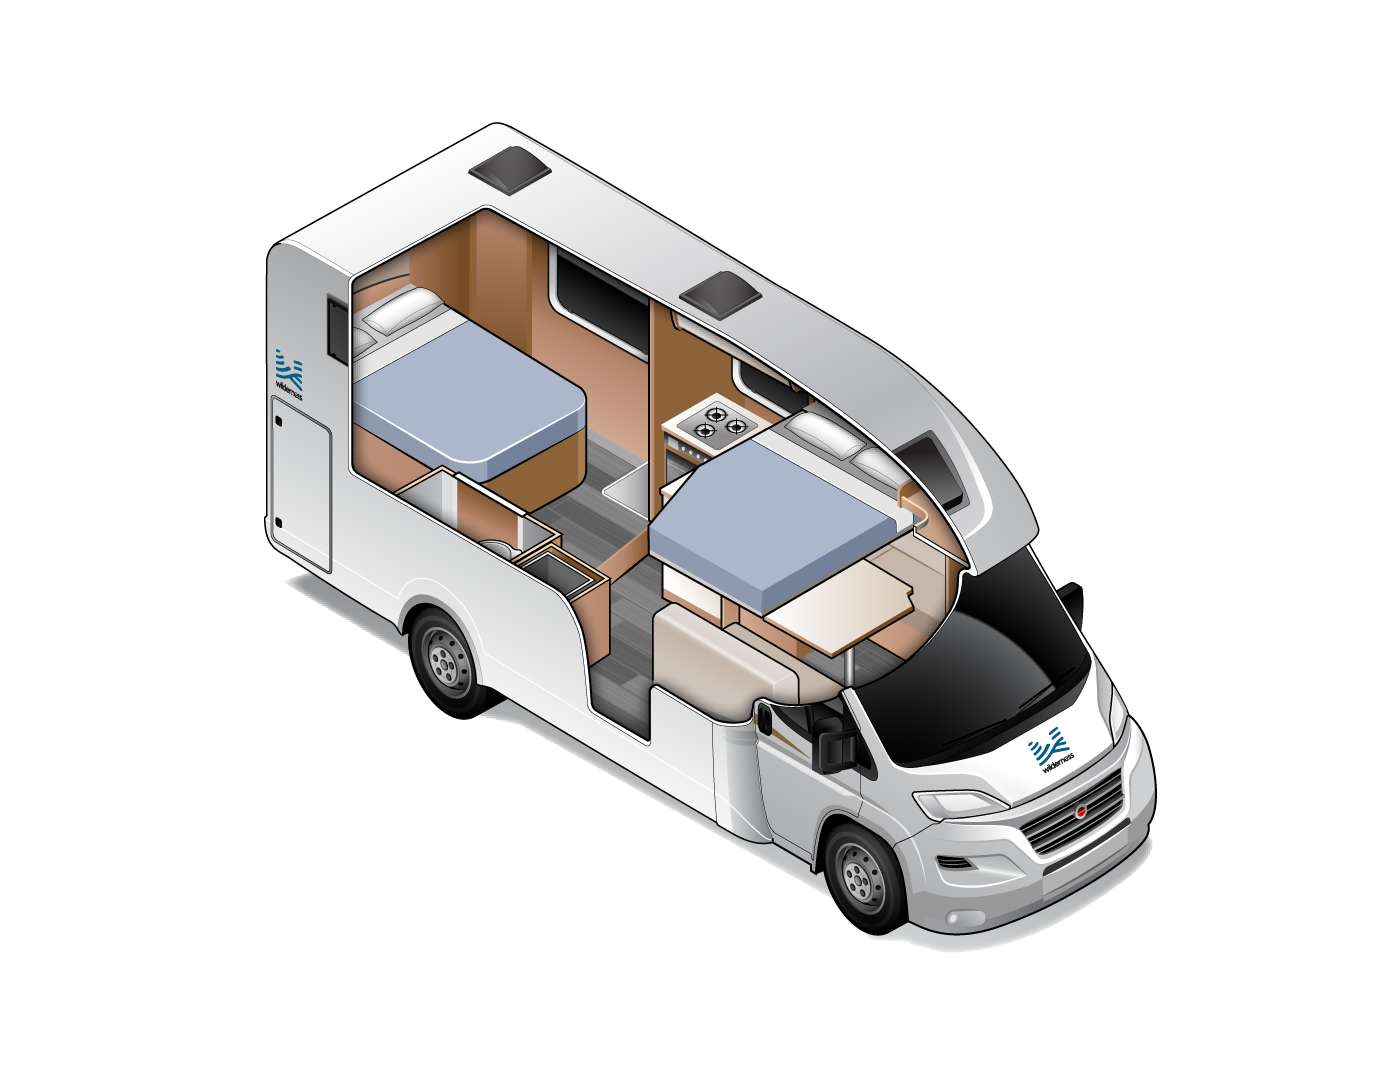 Double for 4 - Four Person Campervan | Wilderness Motorhomes - Interior #2